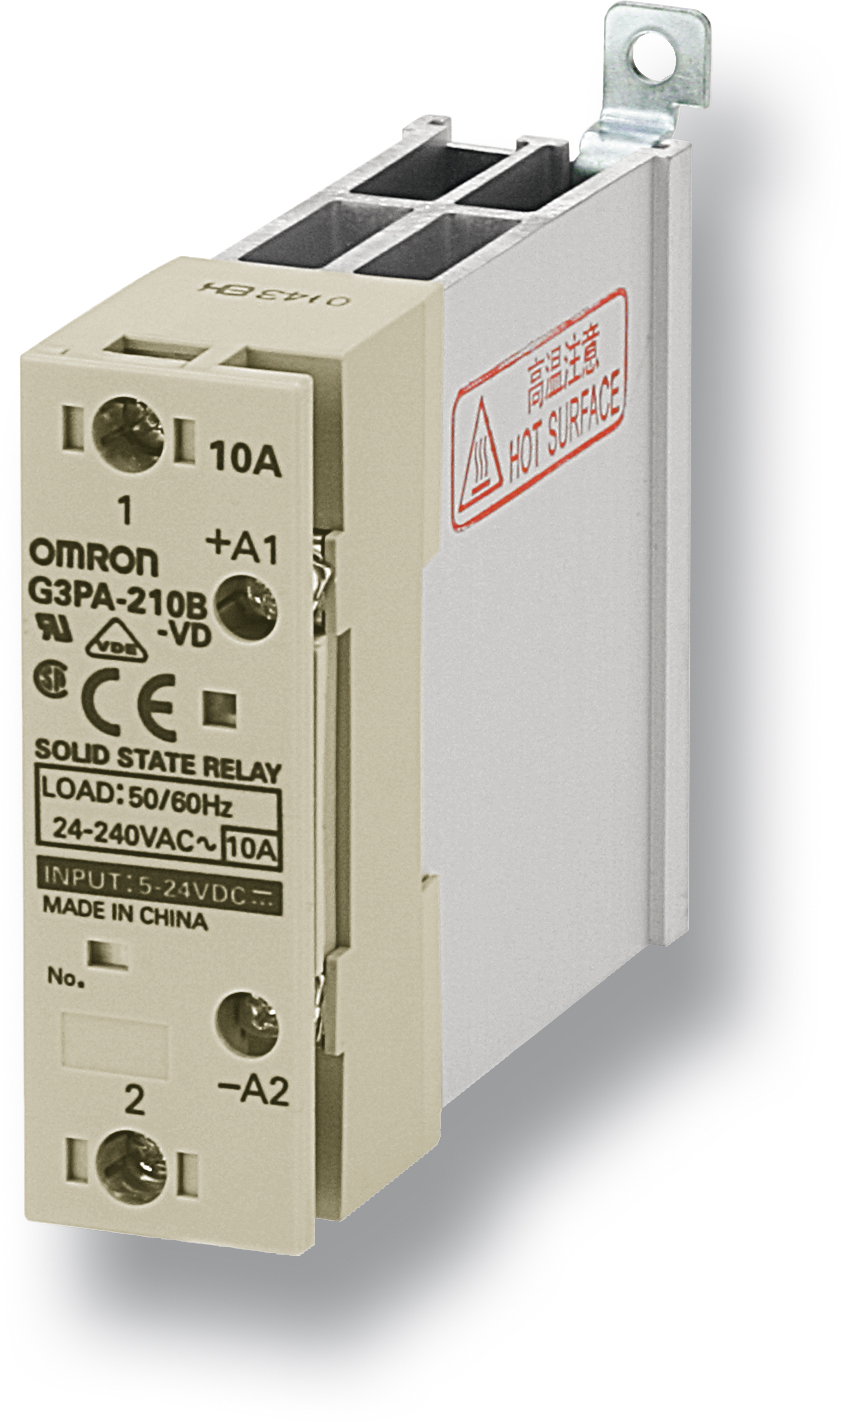 OMRON SOLID STATE RELAY G3PA-210B 5-24Vdc 10A A AMP 100-240Vac w/ G32A-A10